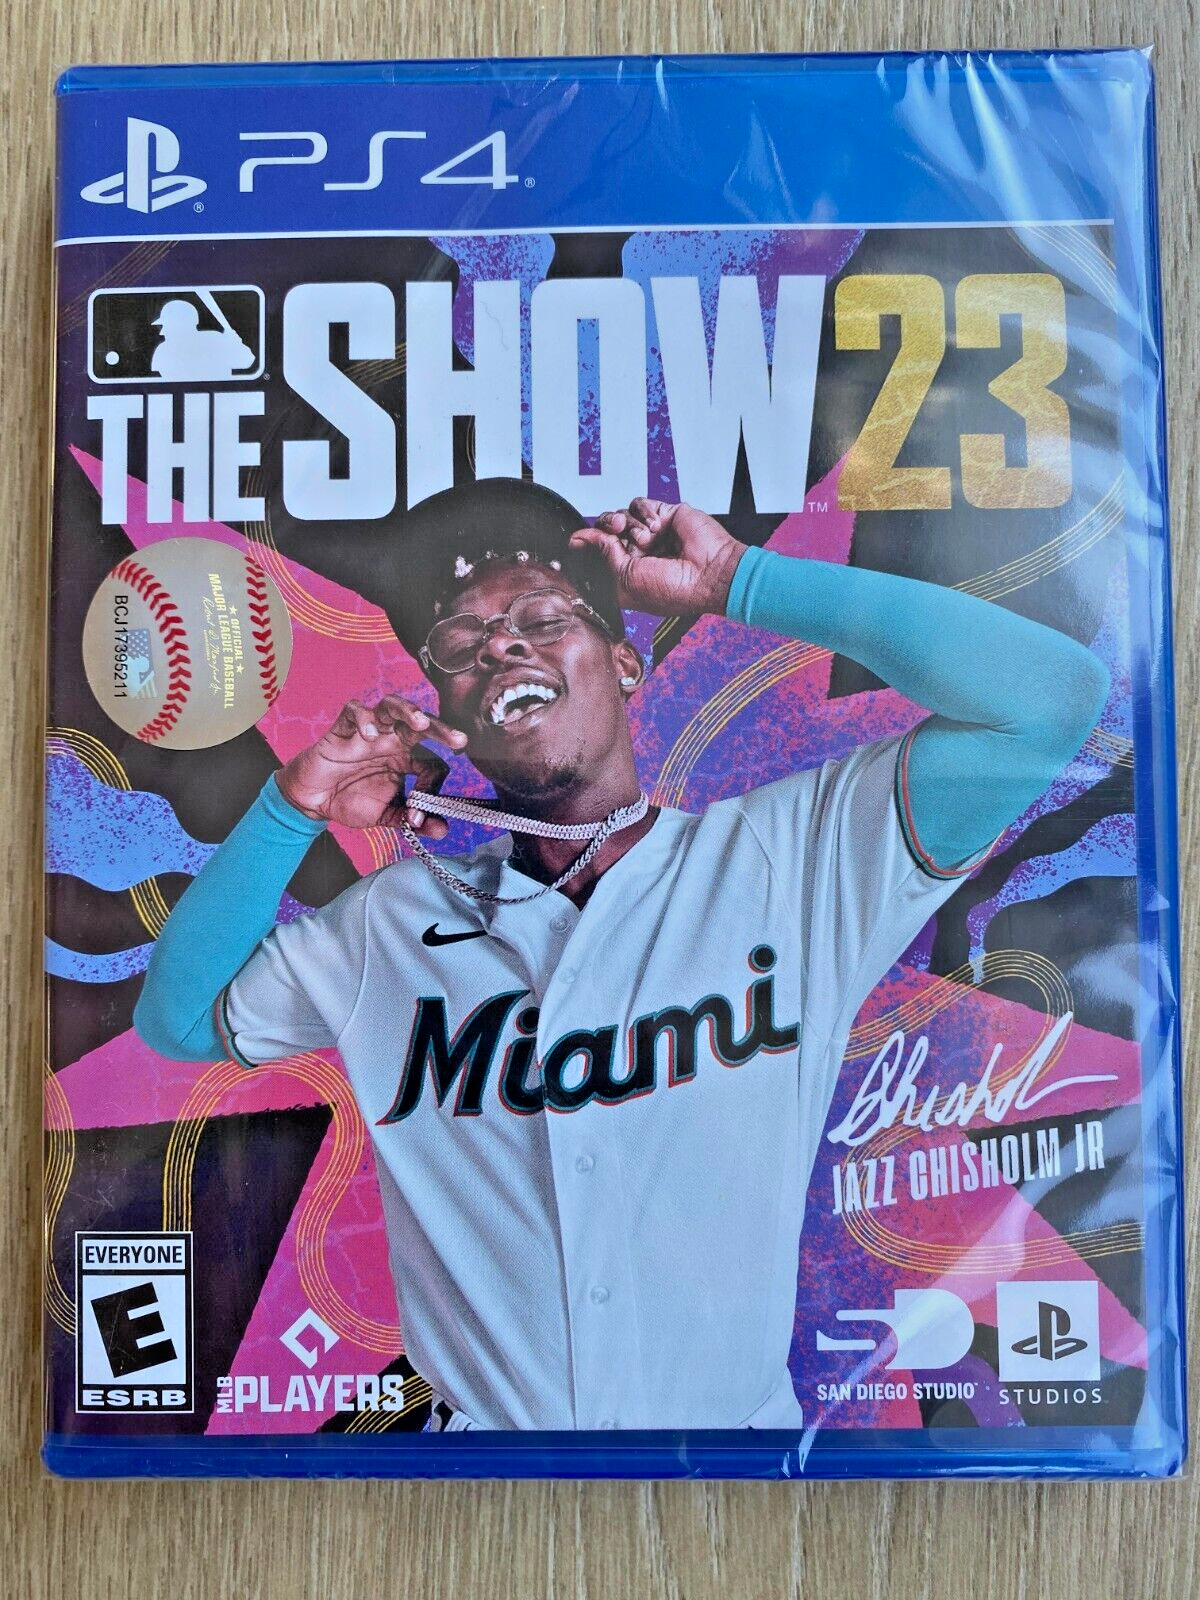 MLB The Show 23 2023 Playstation 4 PS4 (Video Game) - image 1 of 1